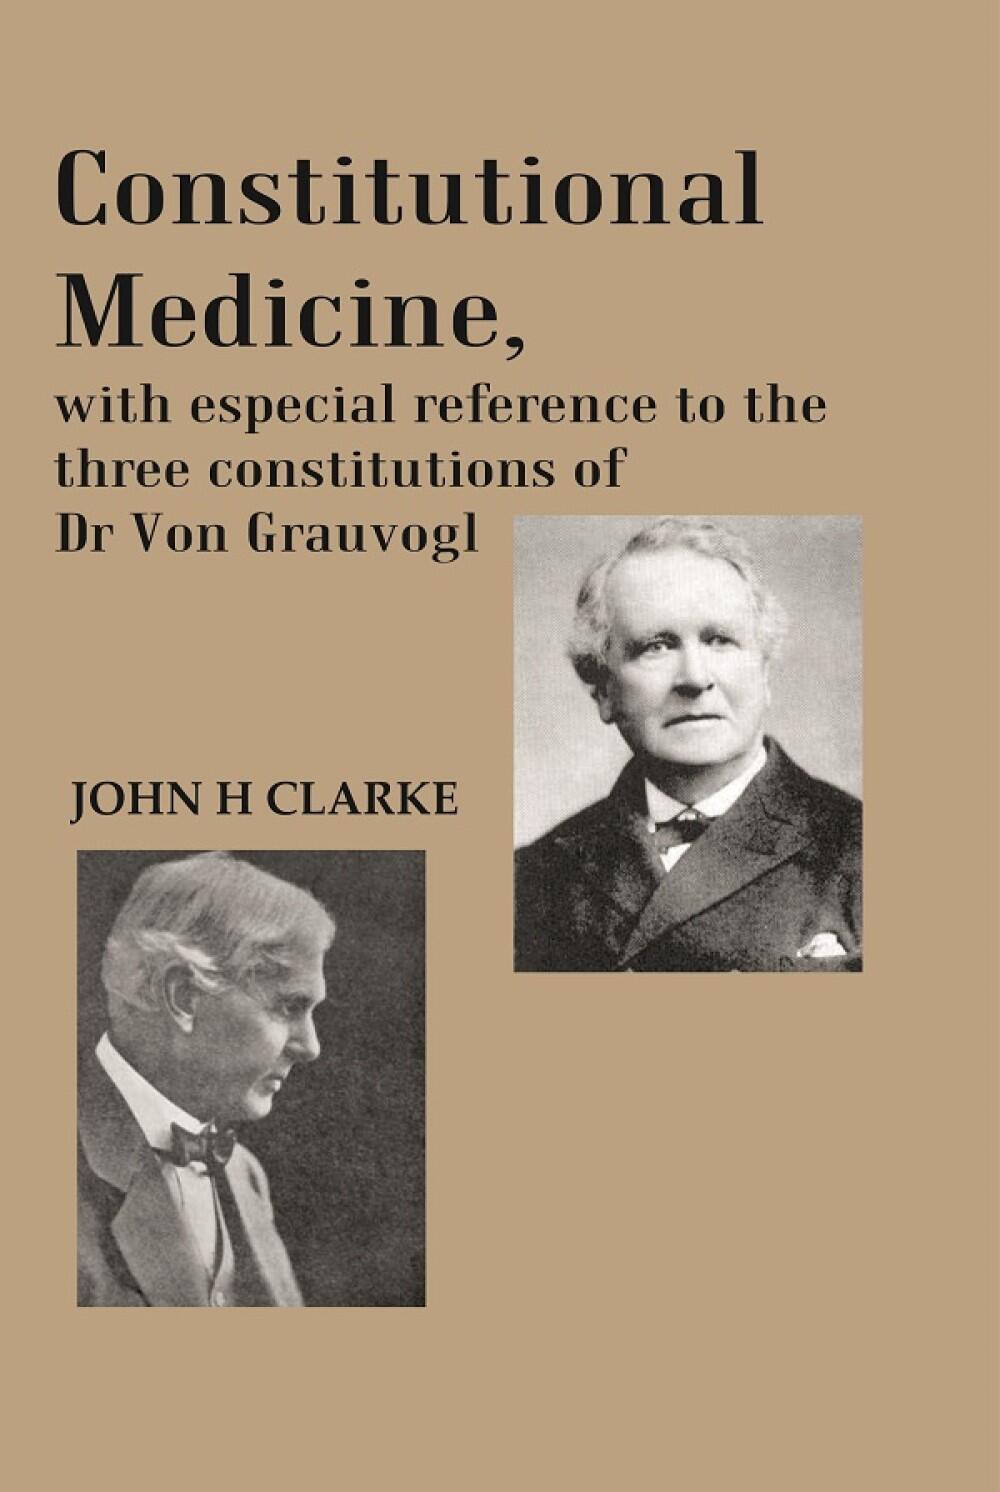 Constitutional Medicine, with especial reference to the three constitutions of Dr Von Grauvogl   ...